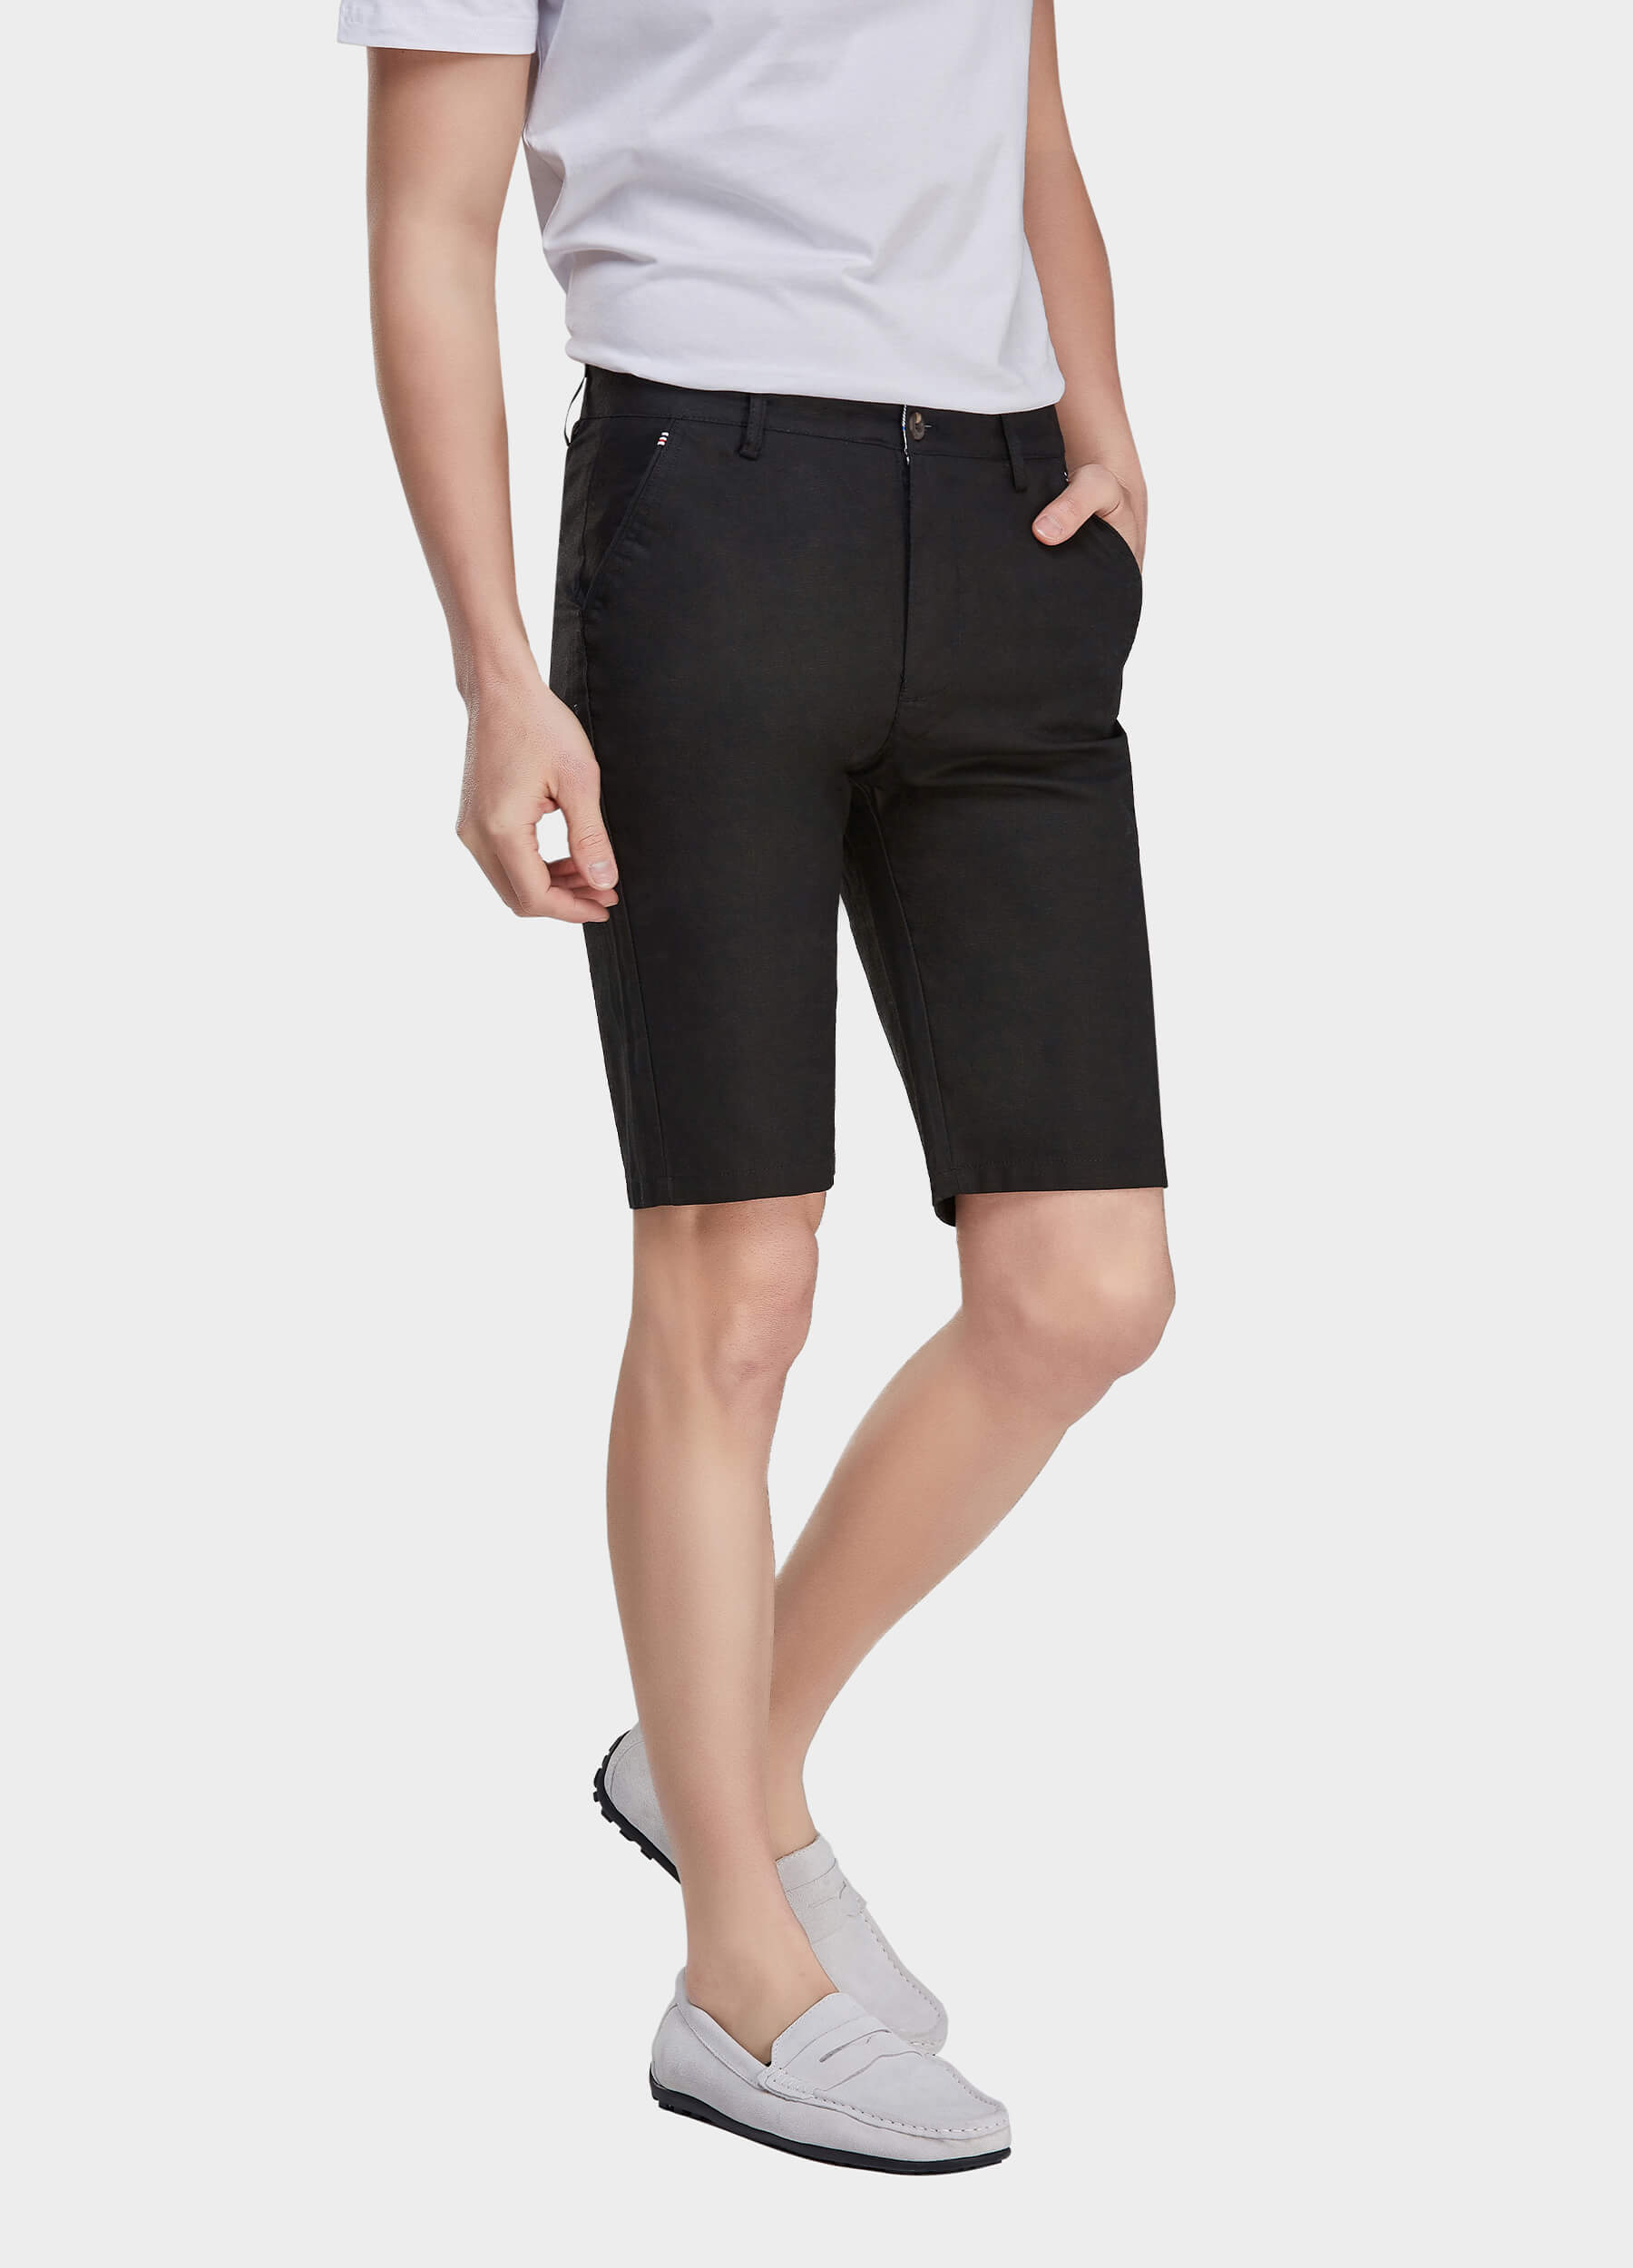 Men's Casual Solid Zipper Fly Button Walk Shorts with Slant Pockets-Black